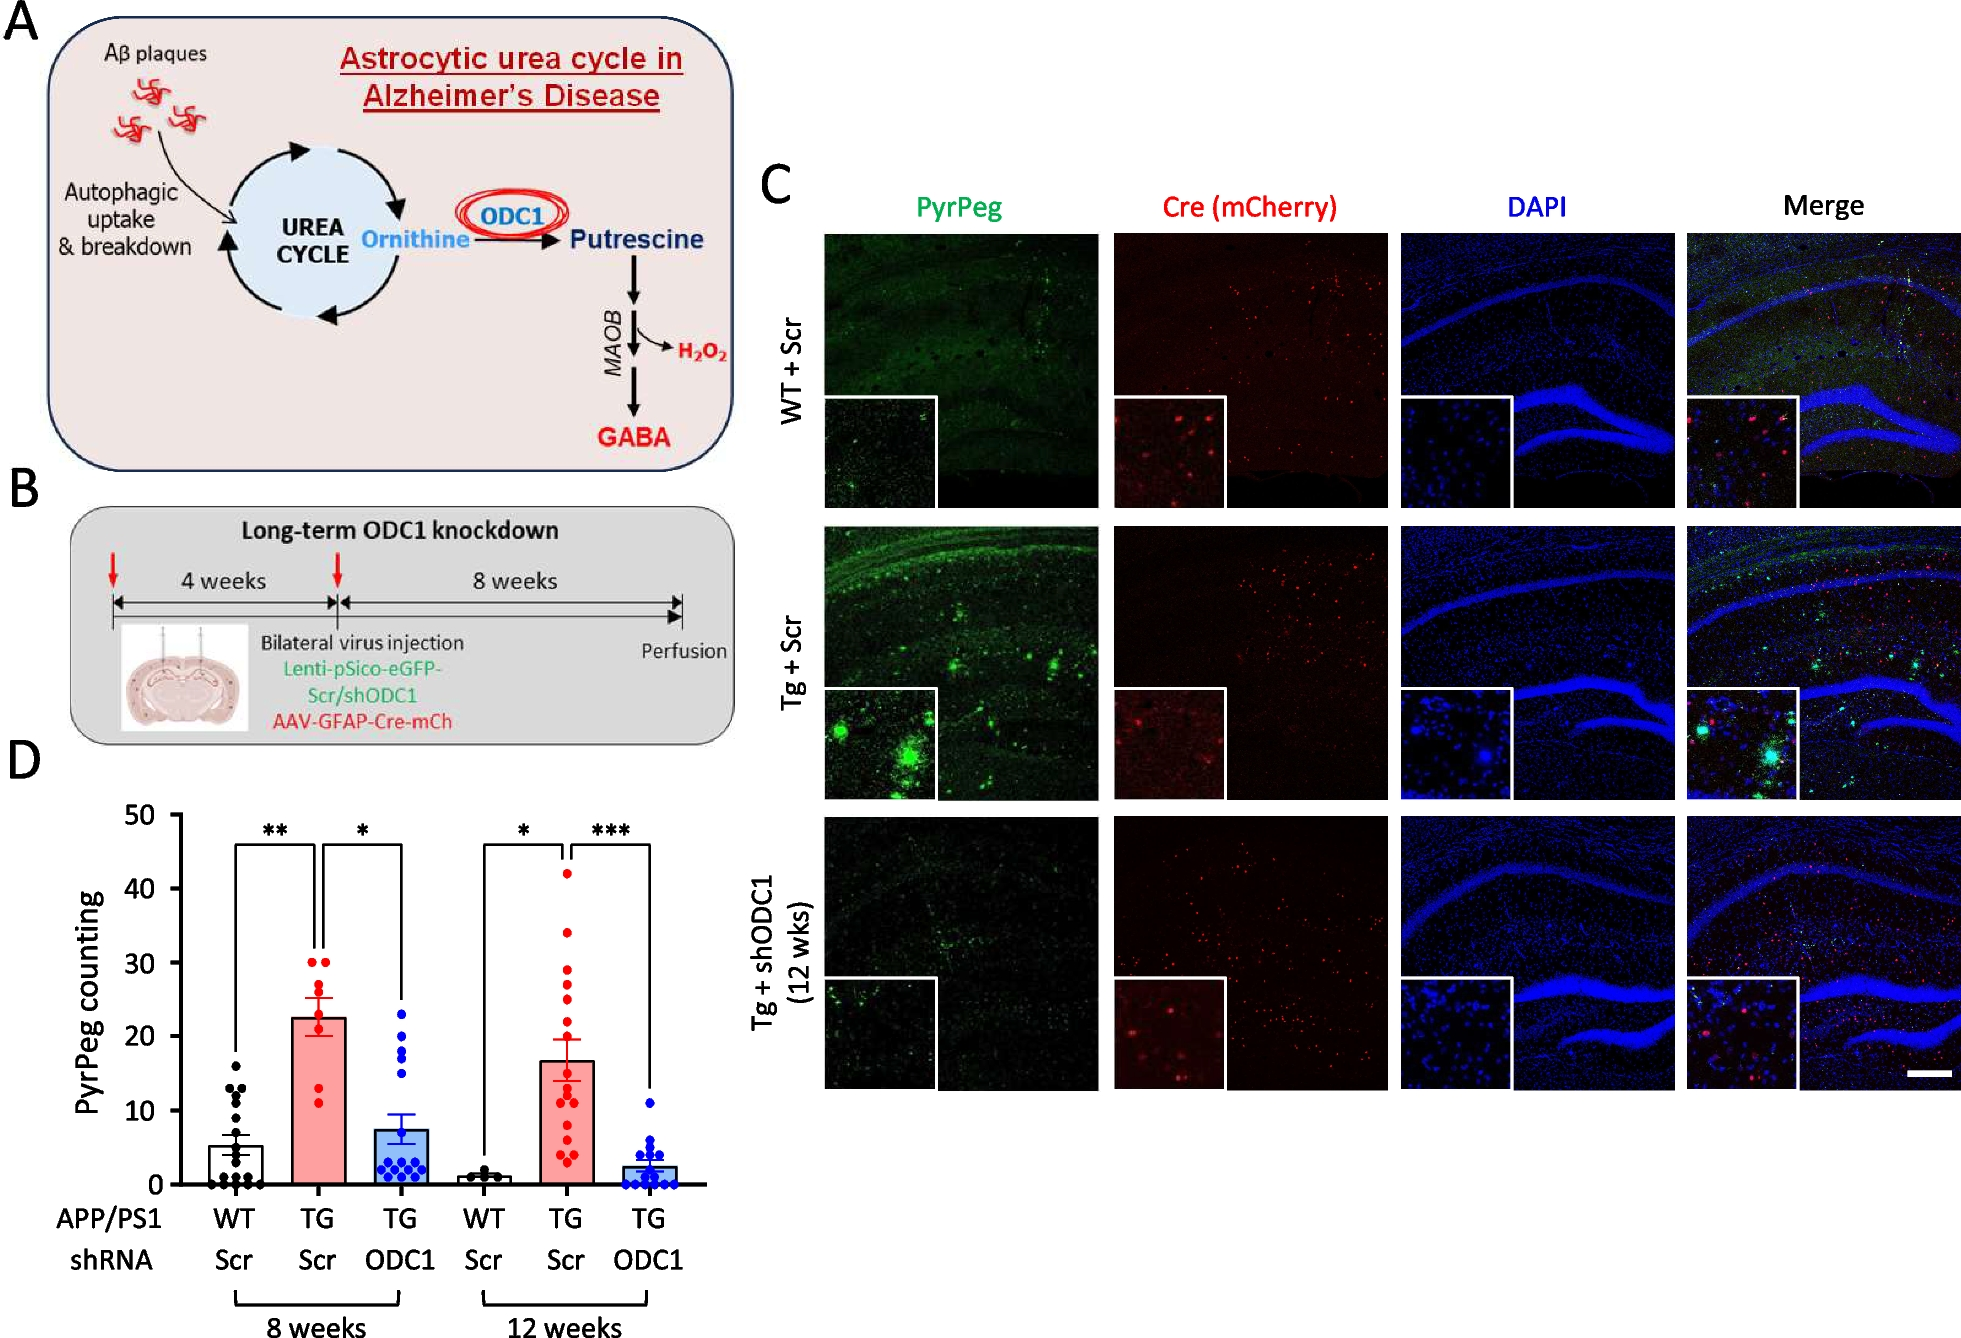 Long-term inhibition of ODC1 in APP/PS1 mice rescues amyloid pathology and switches astrocytes from a reactive to active state